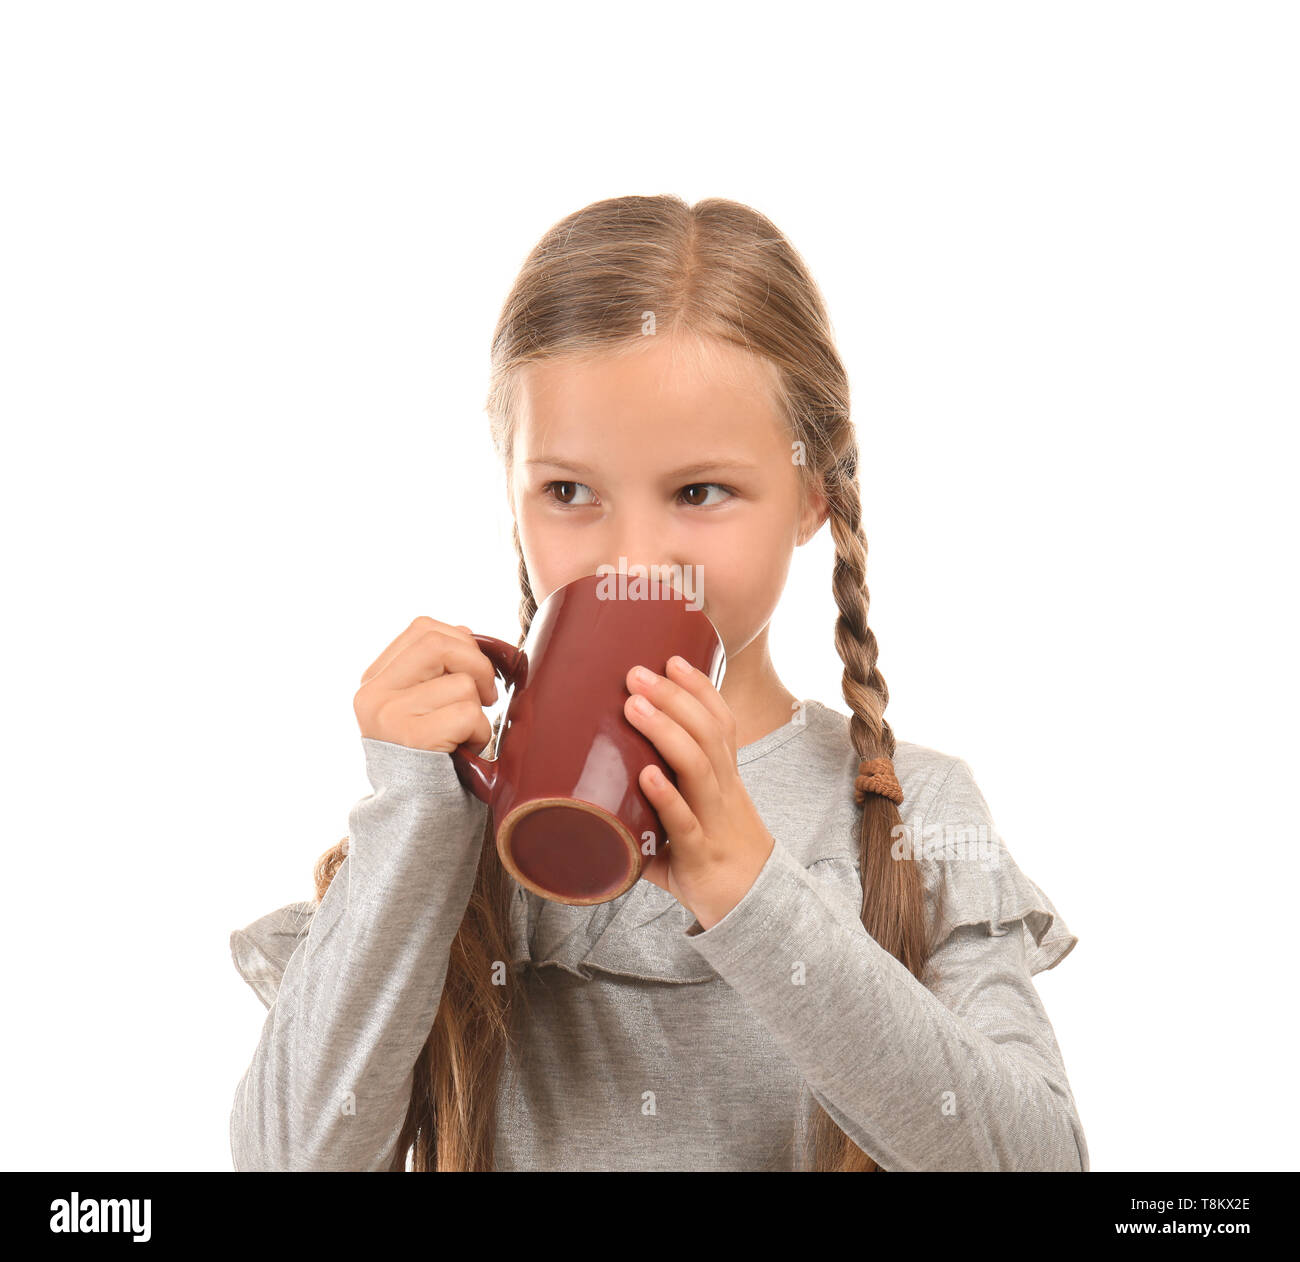 https://c8.alamy.com/comp/T8KX2E/cute-little-girl-with-cup-of-hot-chocolate-on-white-background-T8KX2E.jpg